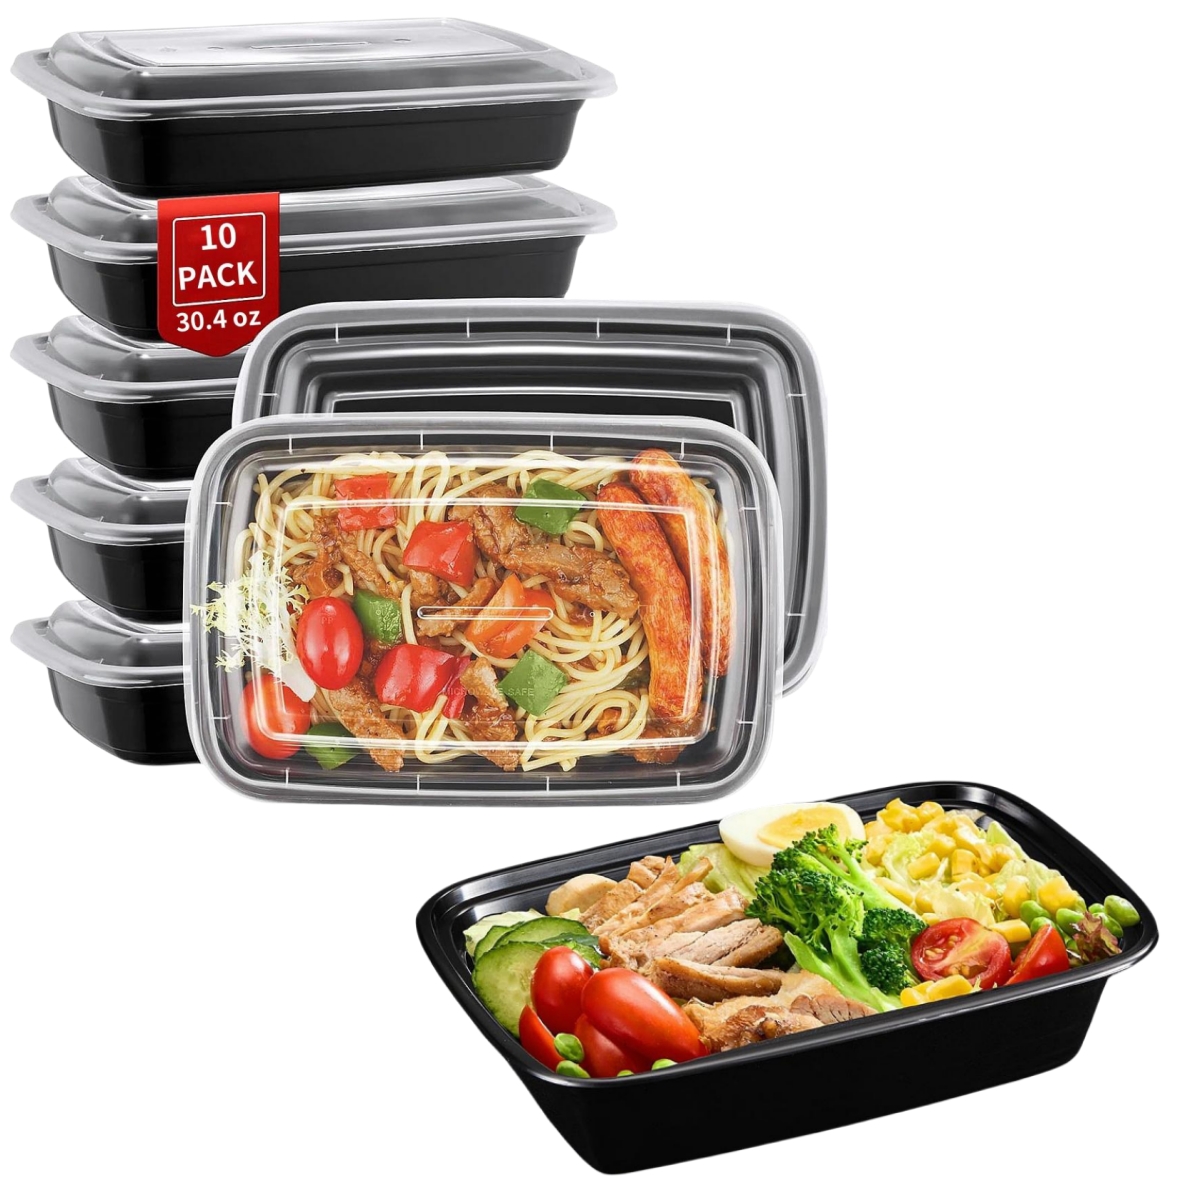 

30.4oz Meal Prep Containers, Extra Large &thick Food Storage Containers With Lids, Reusable Plastic,disposable Bento Box,stackable,microwave/freezer/dishwasher Safe, Bpa Free (10 Sets)